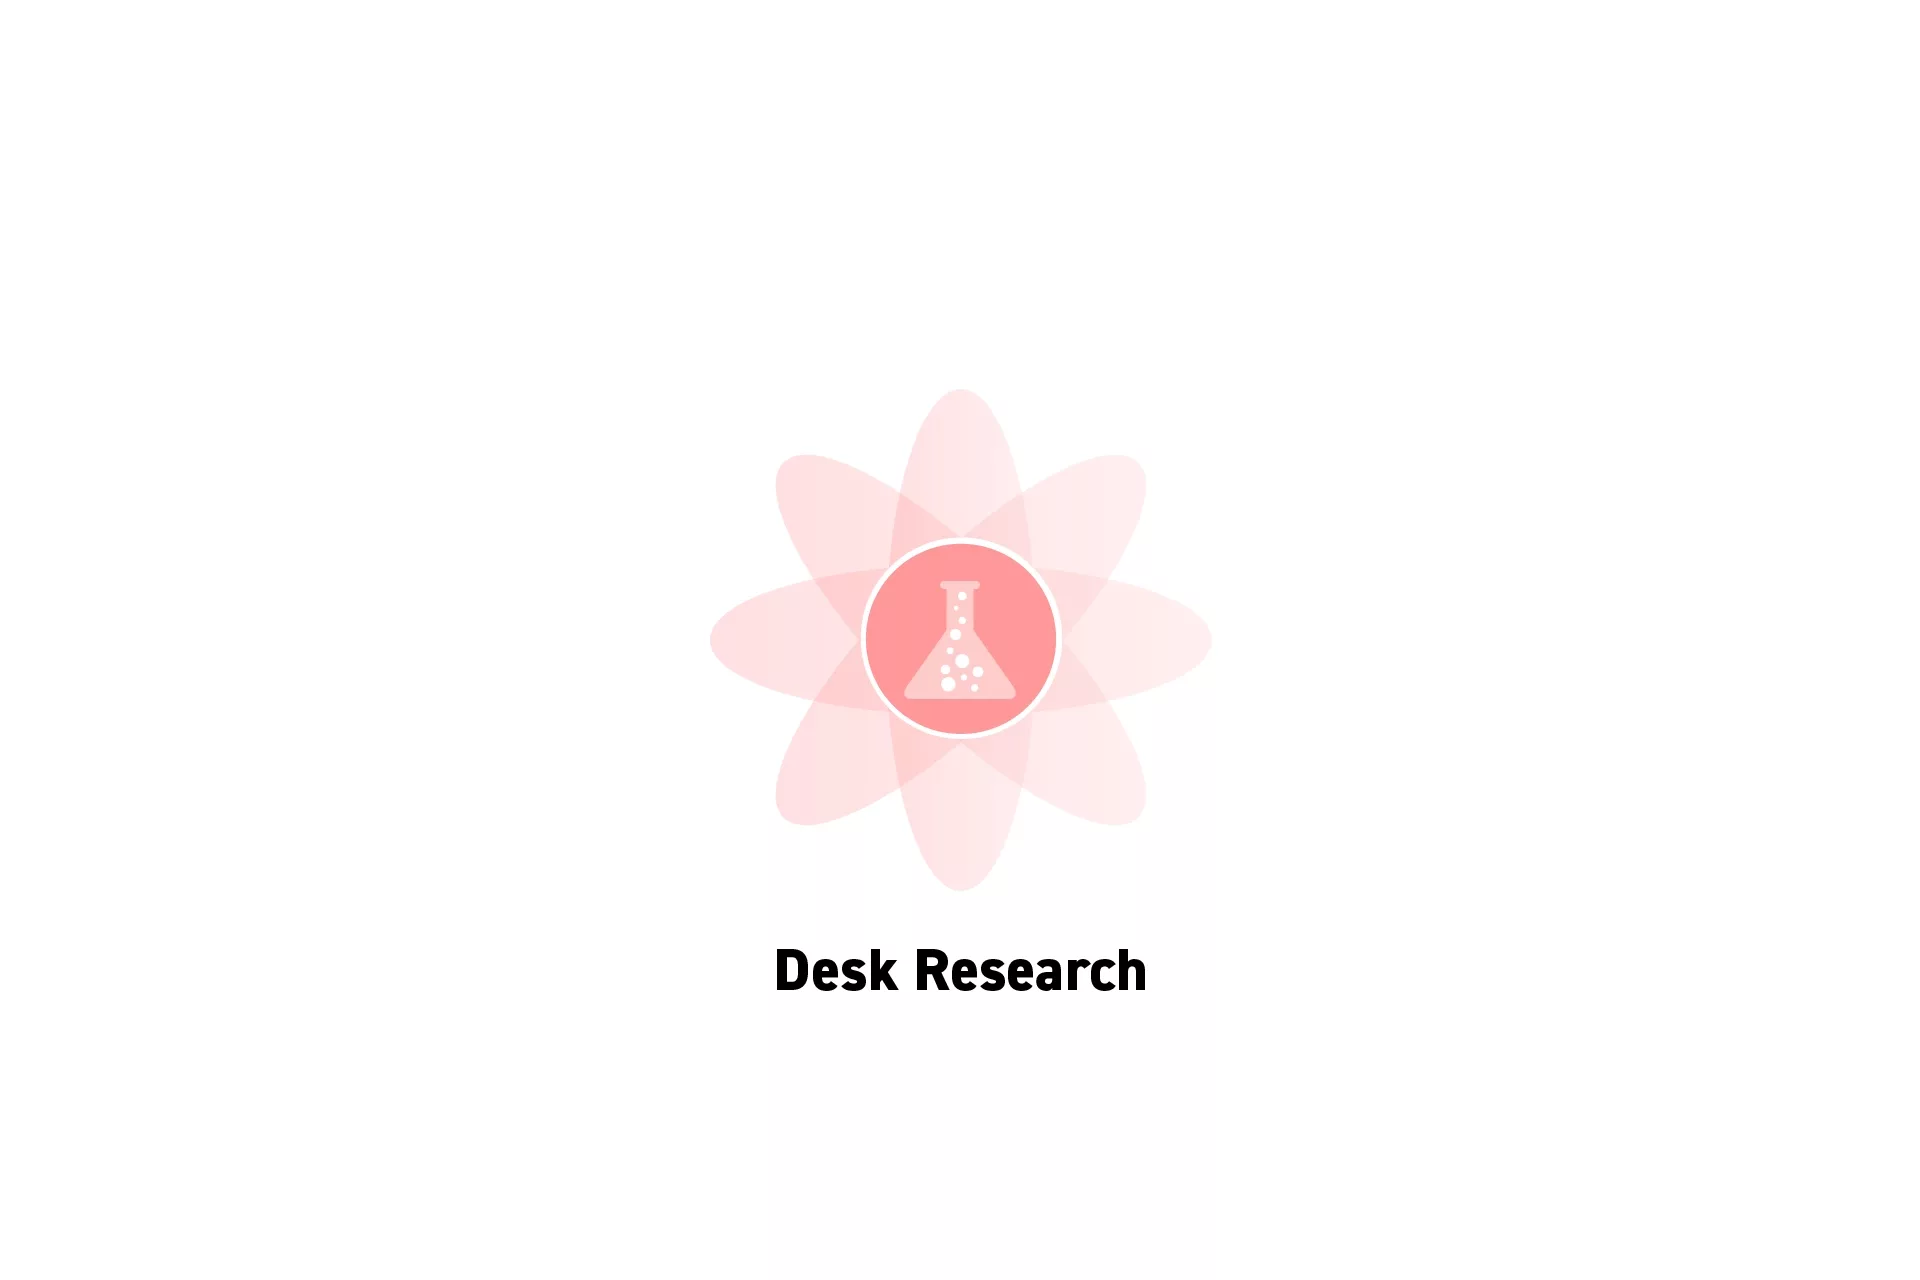 A flower that represents Strategy with the text "Desk Research" beneath it.